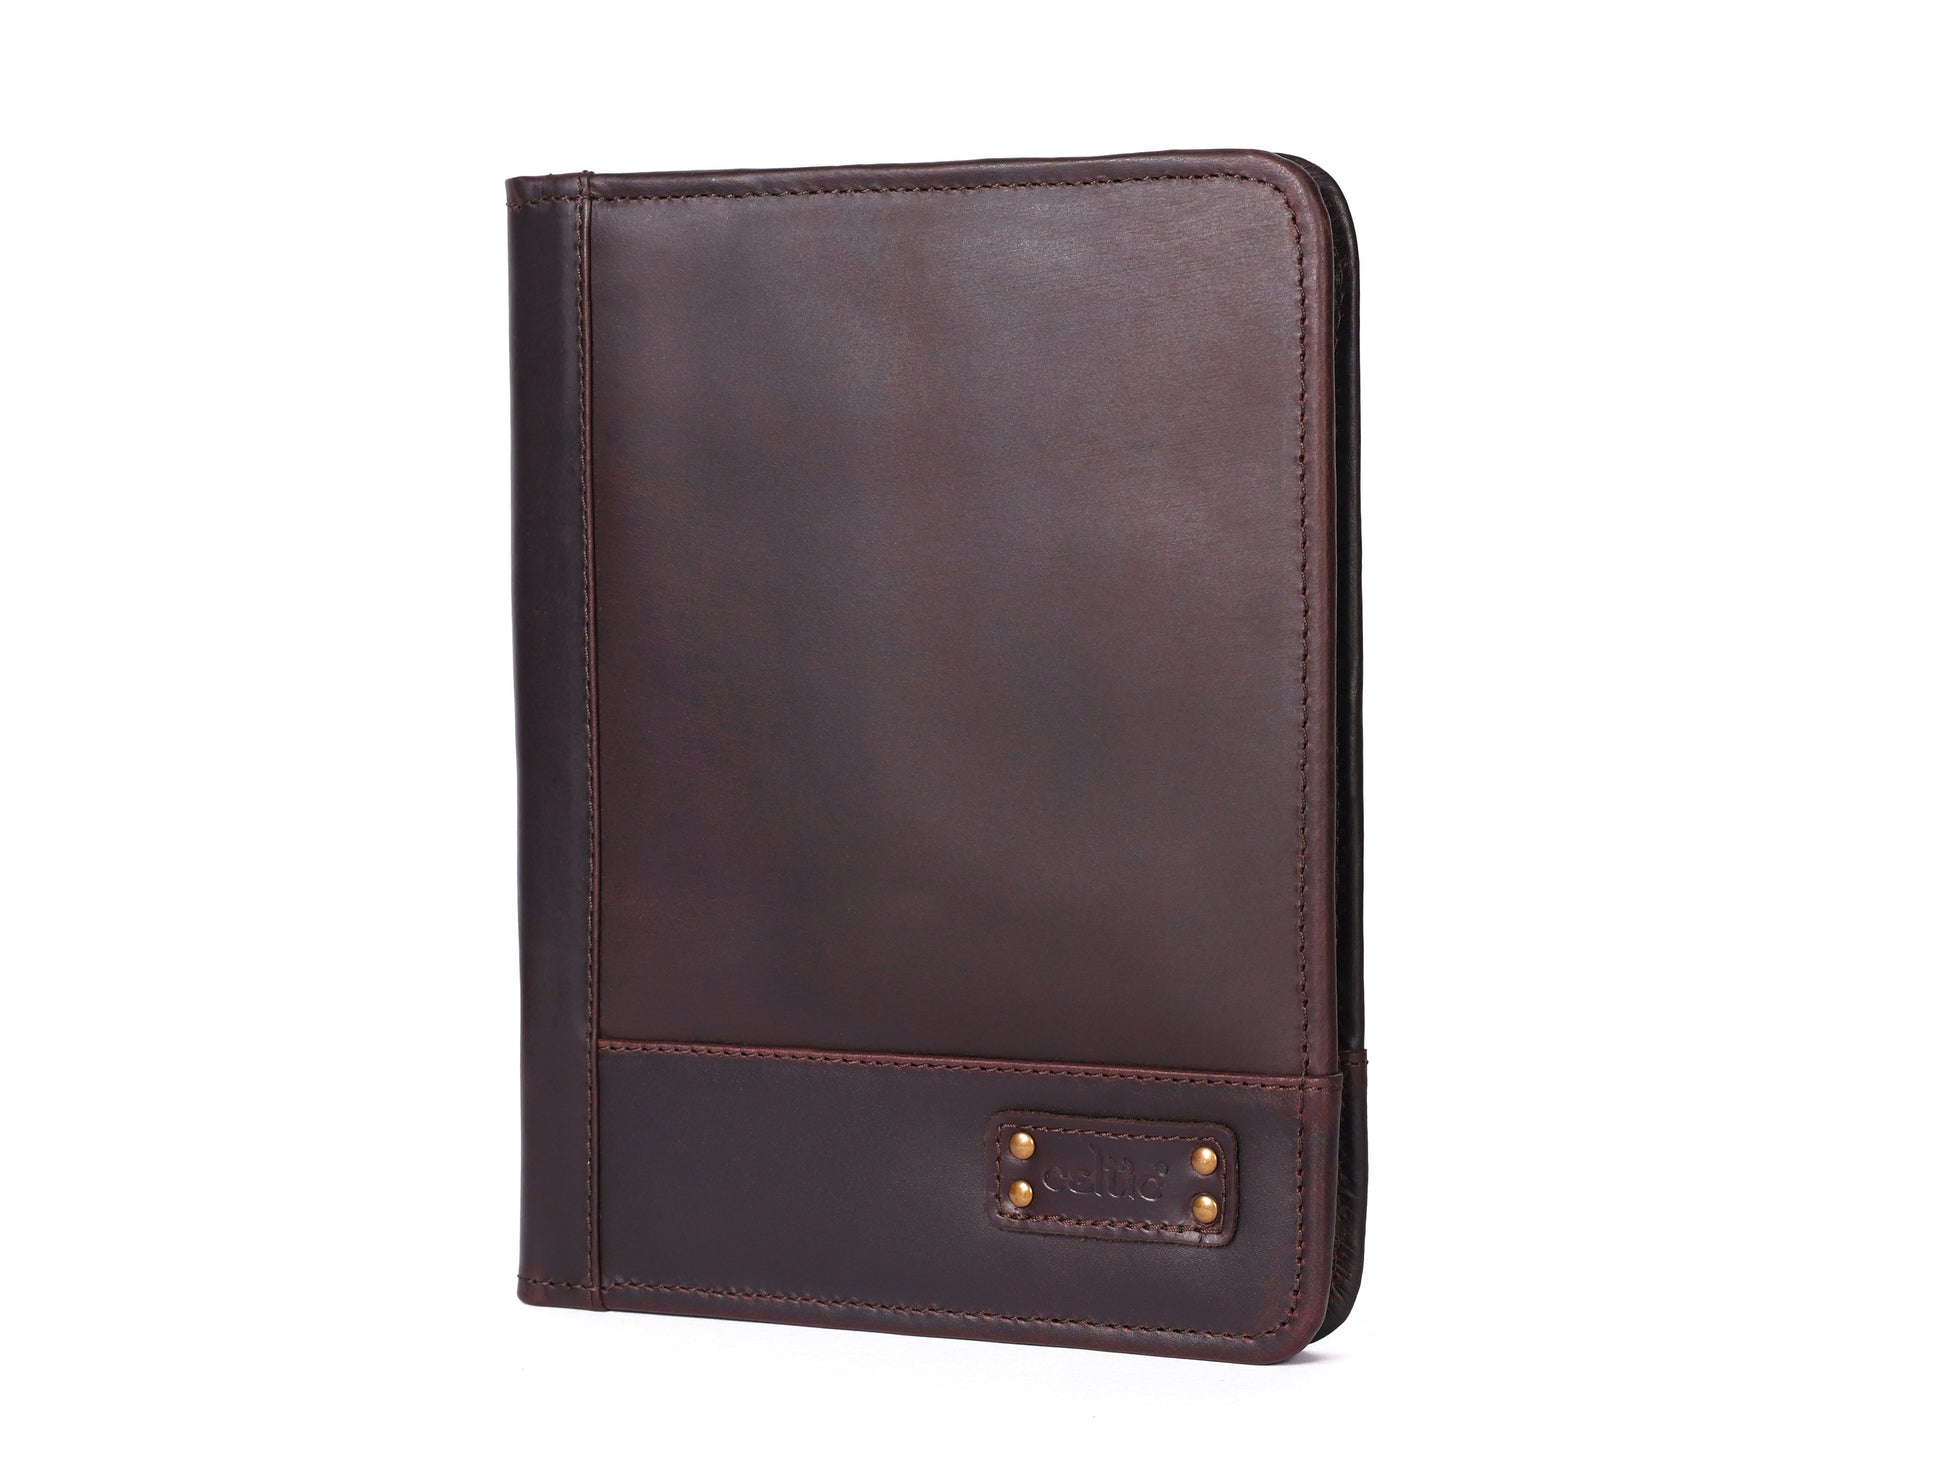 Premium Leather Diary Cover with Spacious Compartments for Pens and Accessories - CELTICINDIA